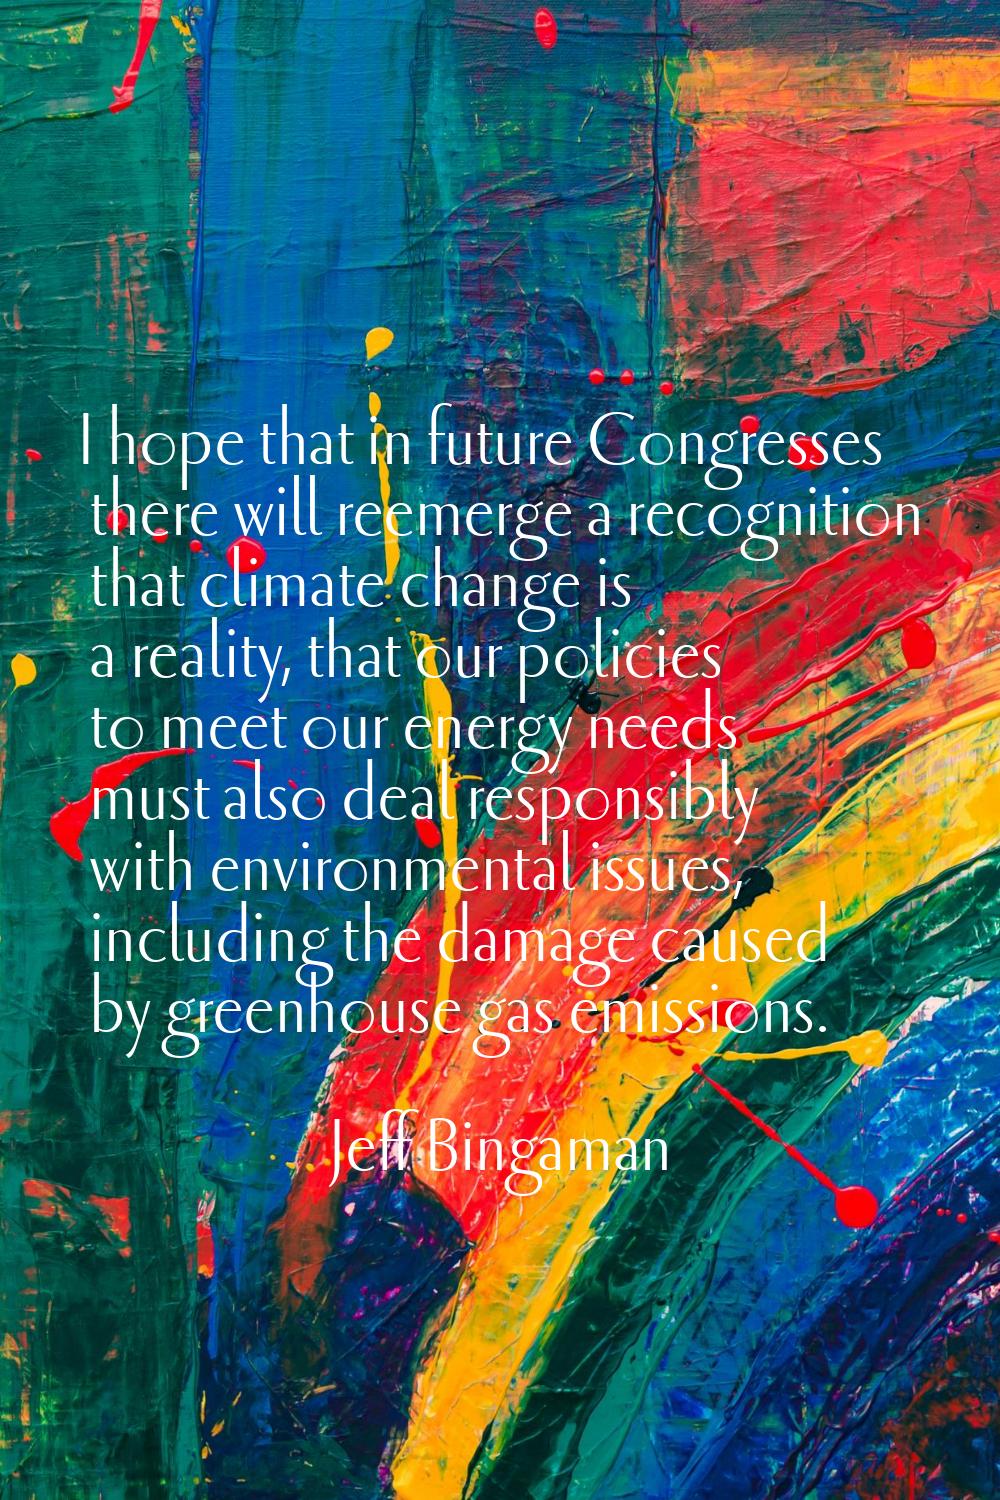 I hope that in future Congresses there will reemerge a recognition that climate change is a reality